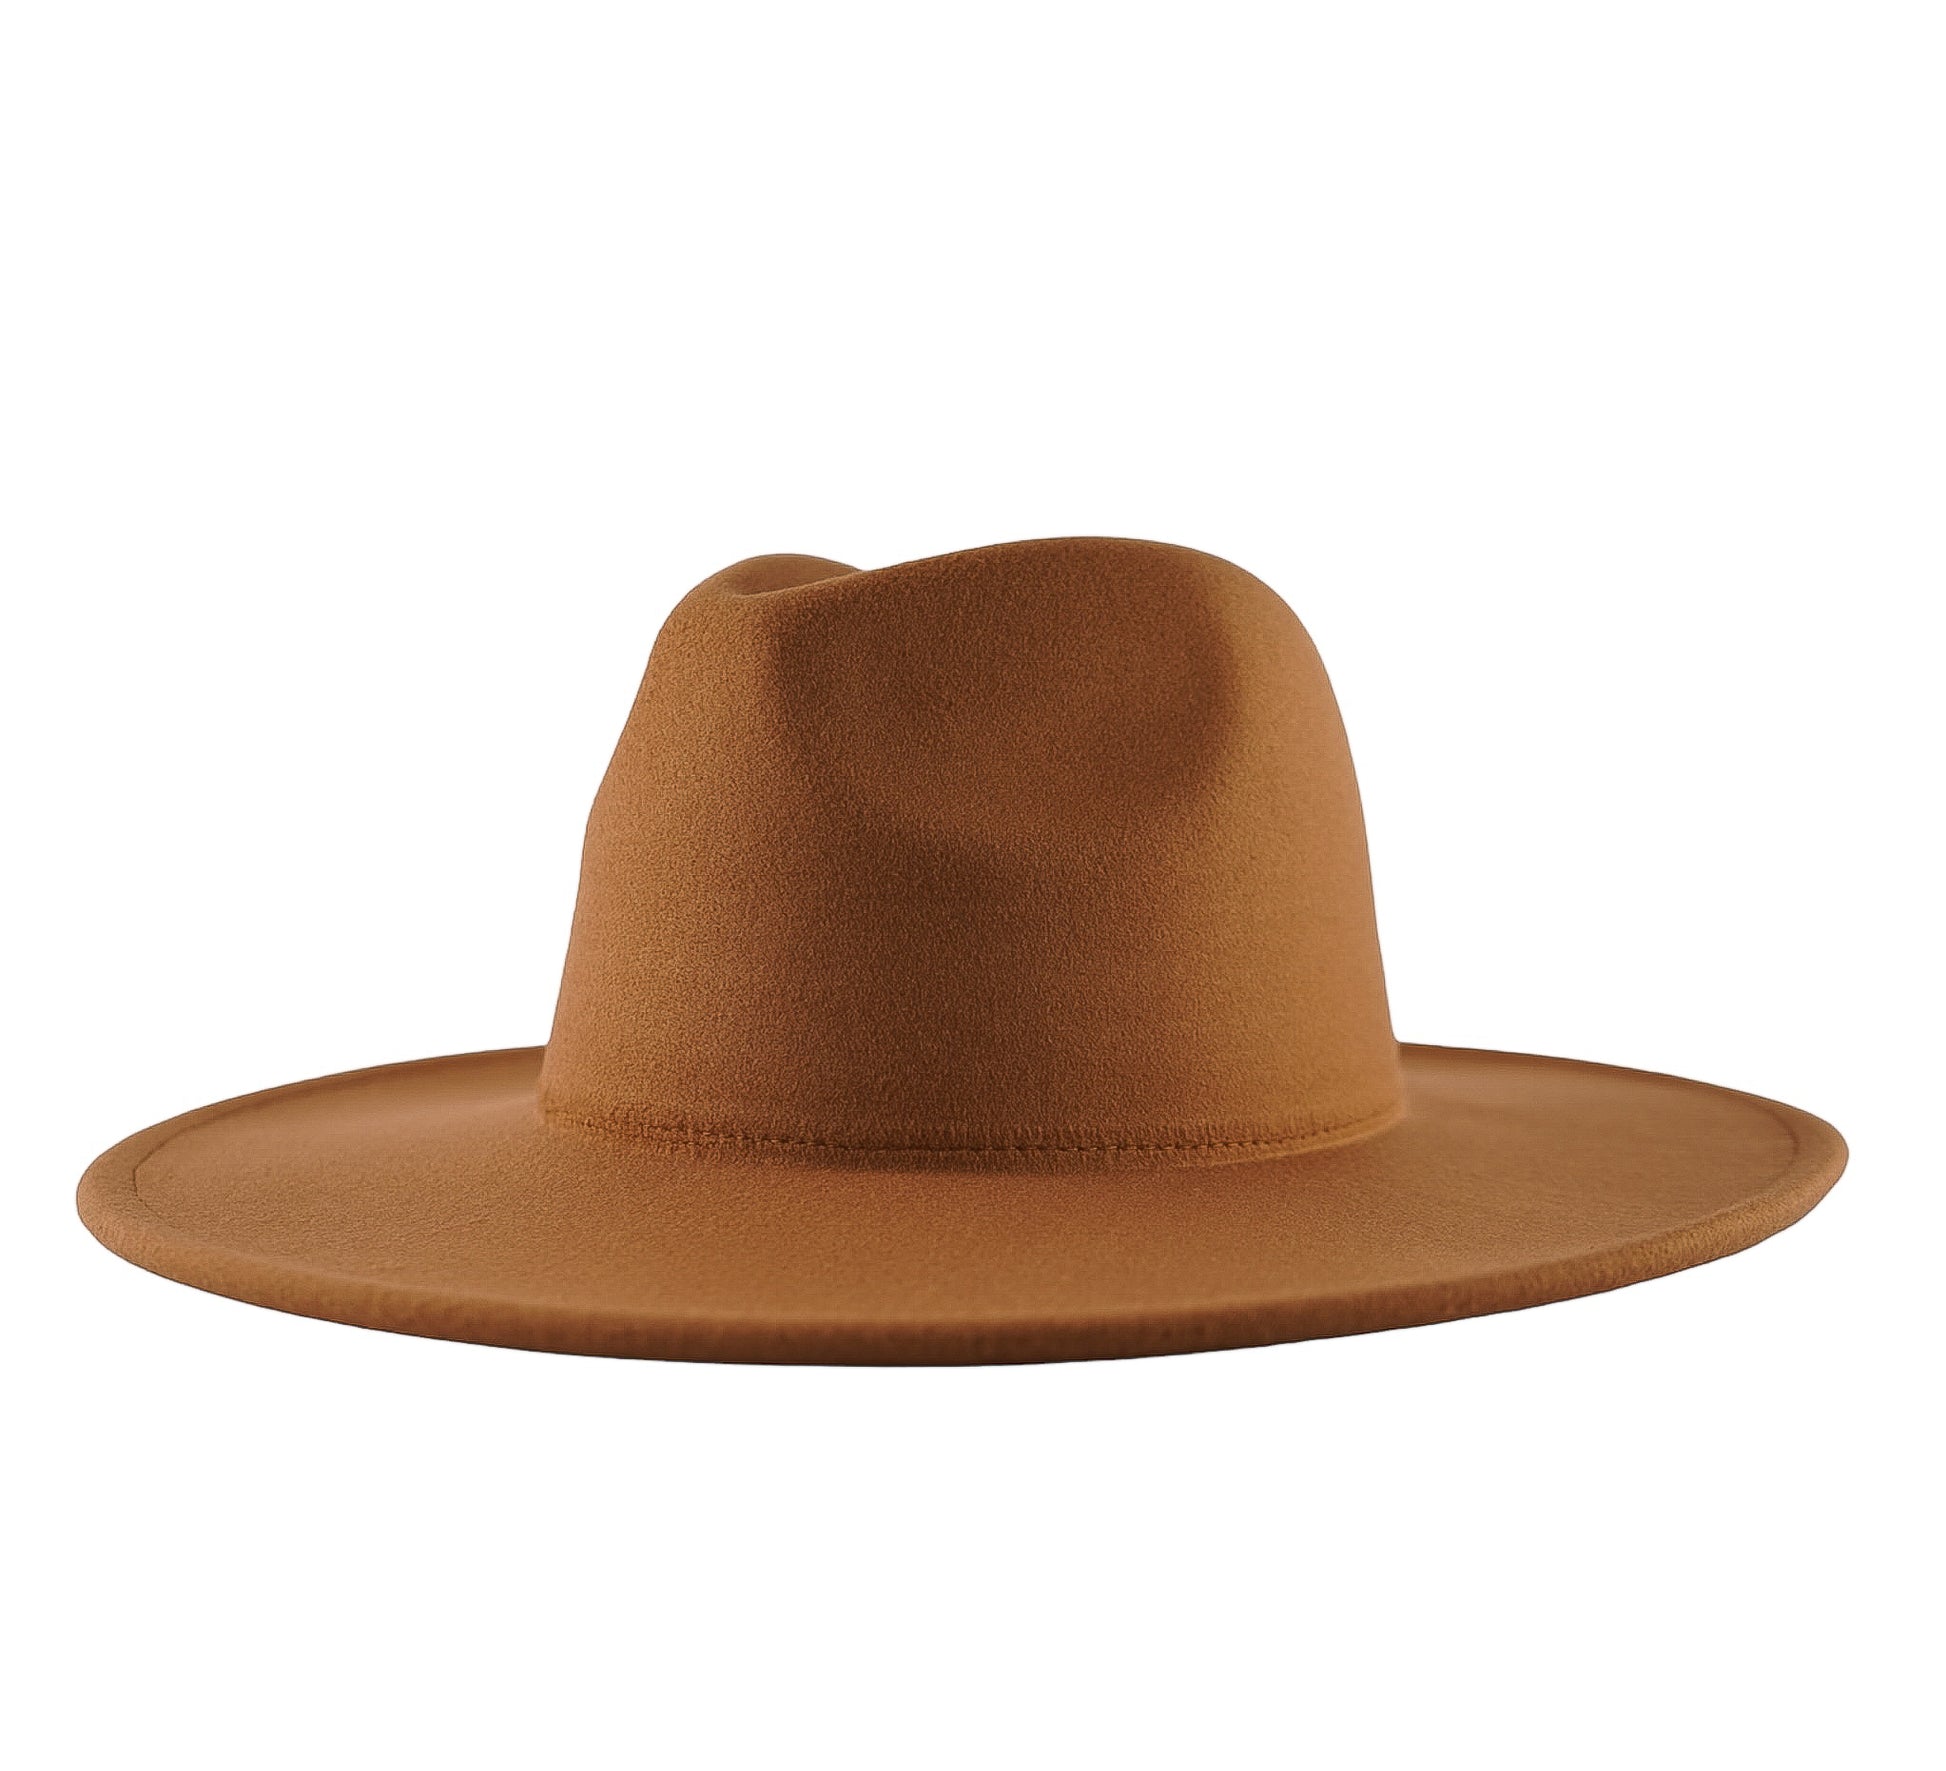 A picture of dope hat's wide brim fedora in dark tan color.